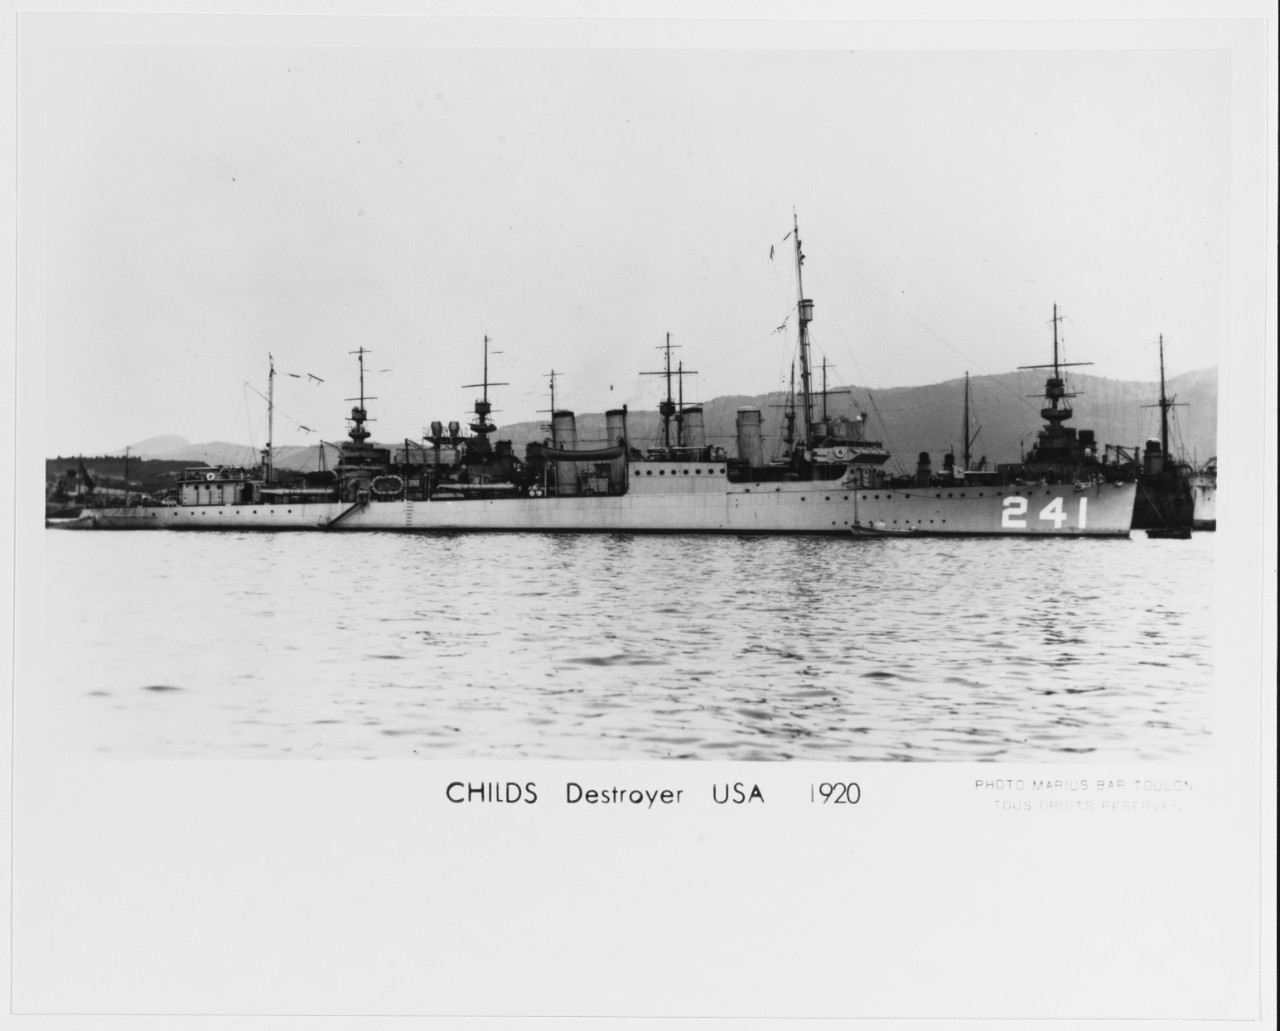 USS CHILDS (DD-241) at Toulon, France.